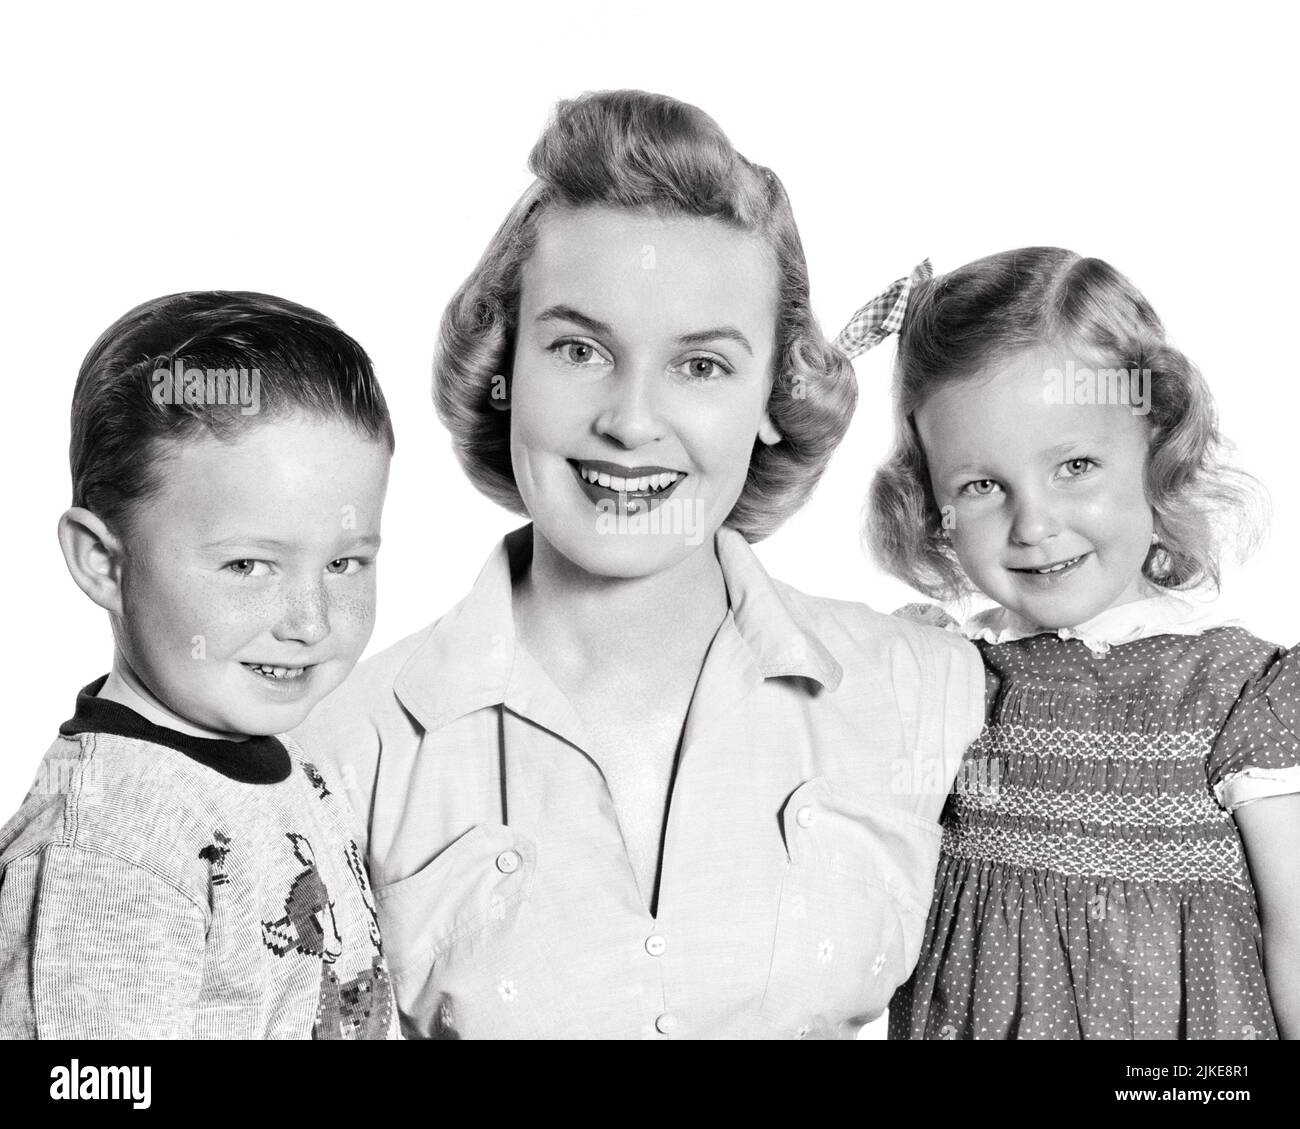 1950s PORTRAIT OF MOTHER AND TWO CHILDREN BOY AND A GIRL ALL SMILING LOOKING AT CAMERA - j995 HAR001 HARS OLD FASHION SISTER 1 JUVENILE STYLE SONS PLEASED FAMILIES JOY LIFESTYLE FEMALES BROTHERS STUDIO SHOT HOME LIFE COPY SPACE FRIENDSHIP HALF-LENGTH LADIES DAUGHTERS PERSONS MALES SIBLINGS CONFIDENCE SISTERS B&W EYE CONTACT HAPPINESS CHEERFUL AND TRIO PRIDE SIBLING SMILES CONNECTION CONCEPTUAL JOYFUL STYLISH GROWTH JUVENILES MID-ADULT MID-ADULT WOMAN MOMS TOGETHERNESS BLACK AND WHITE CAUCASIAN ETHNICITY HAR001 OLD FASHIONED Stock Photo